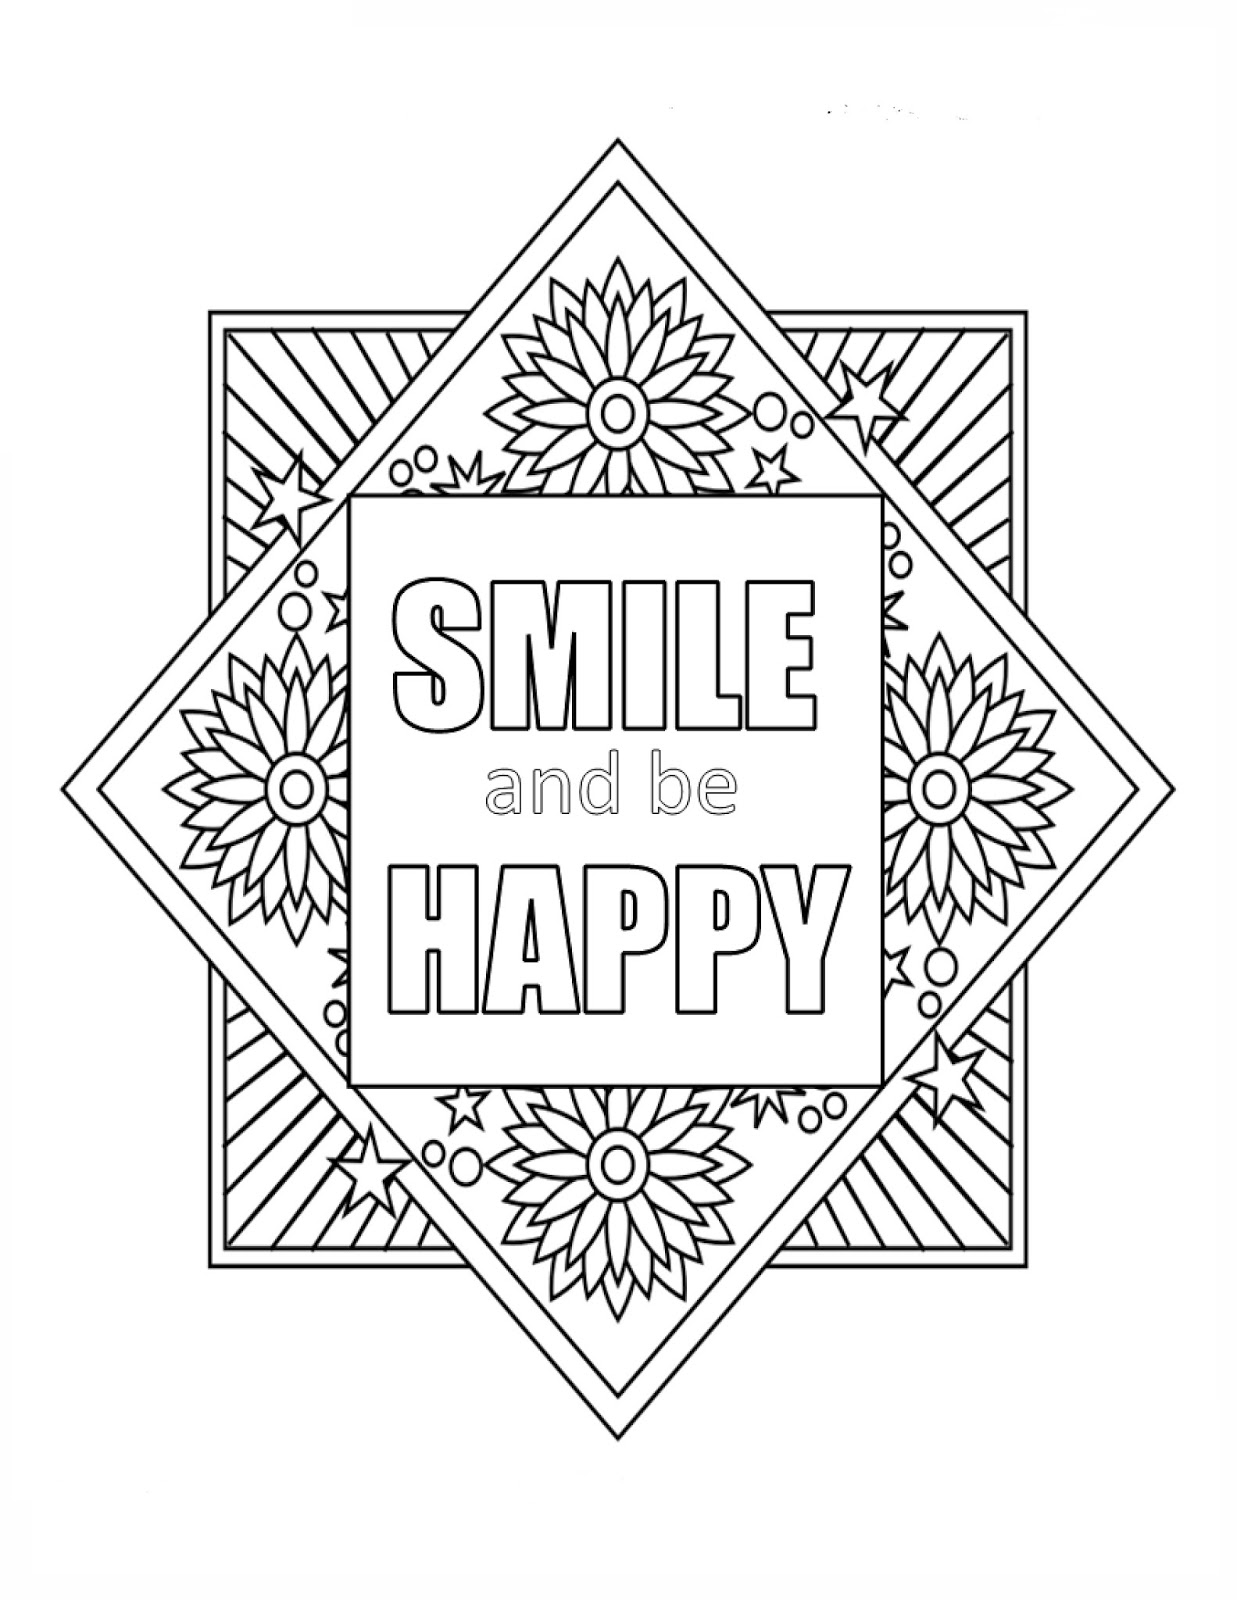 The Best Free Quote Coloring Page Images Download From 356 Free Coloring Pages Of Quote At